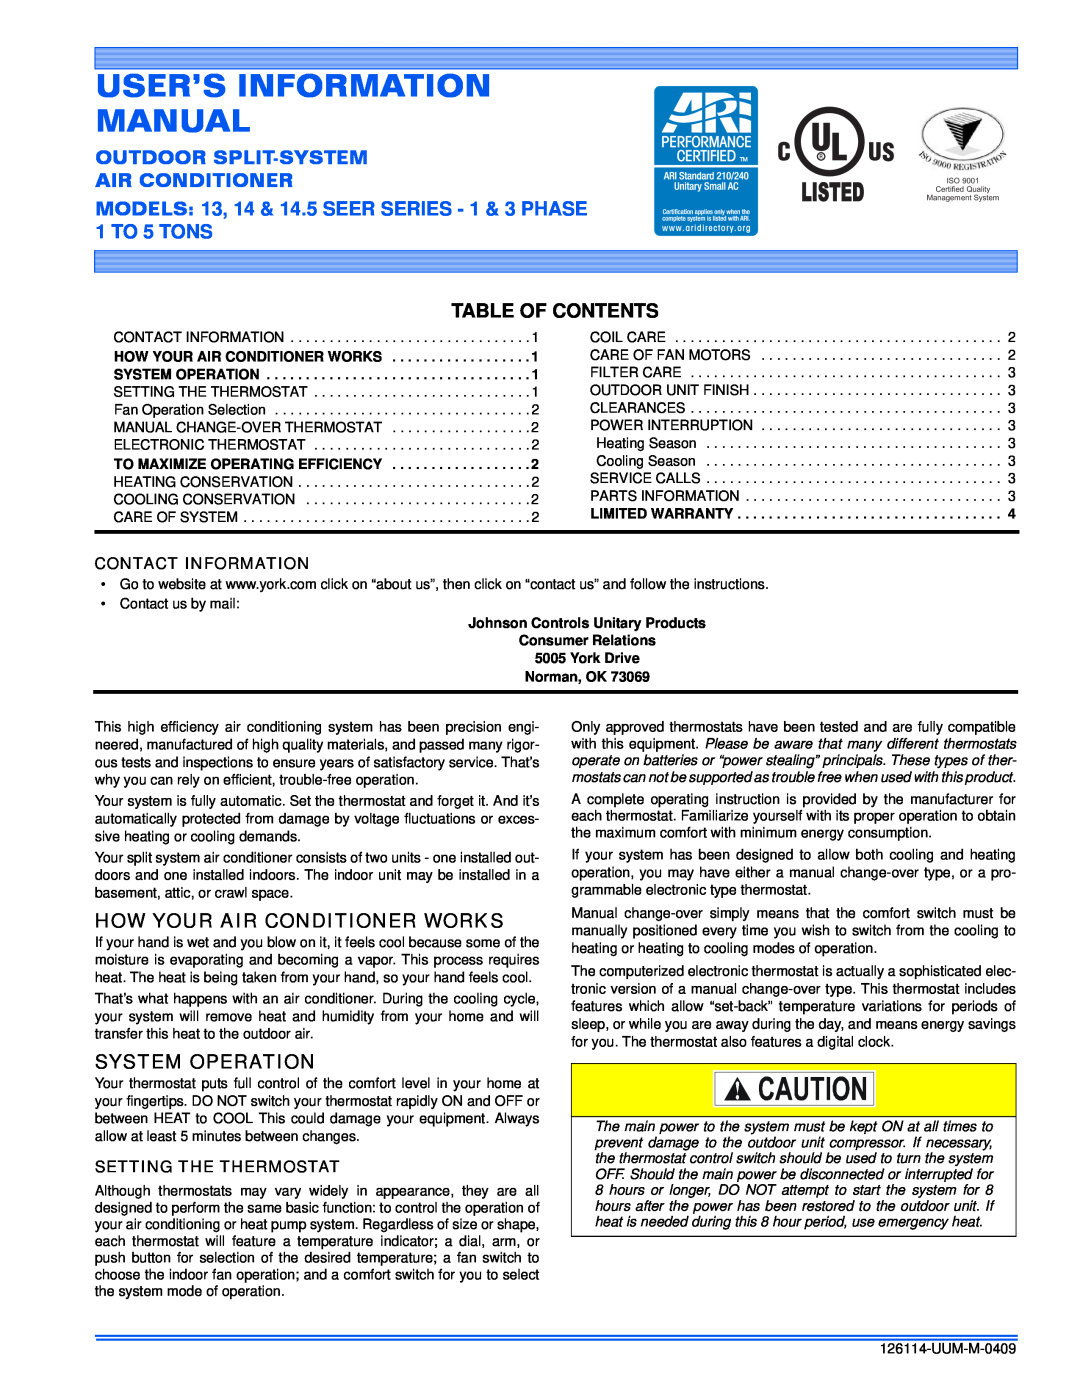 Johnson Controls 13 warranty Table Of Contents, How Your Air Conditioner Works, System Operation, Contact Information 